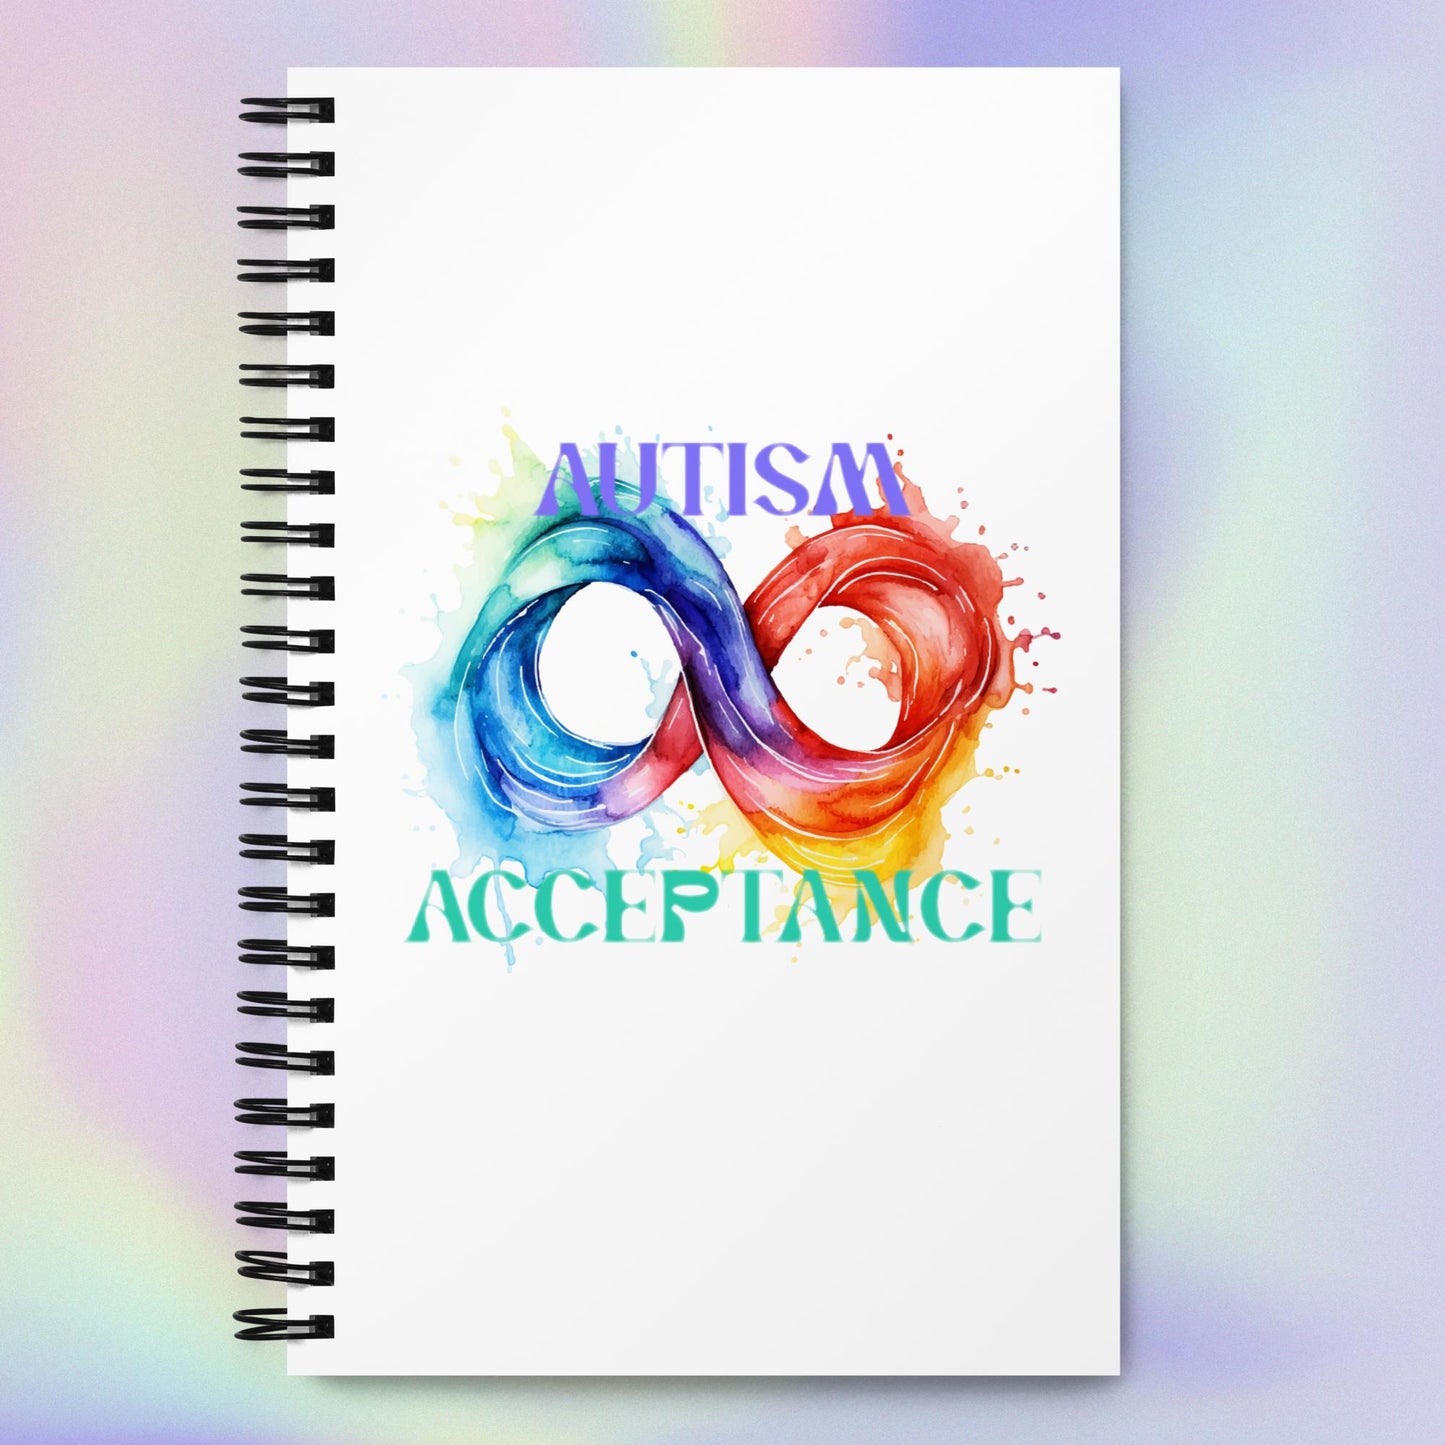 Autims Acceptance - Spiral notebook